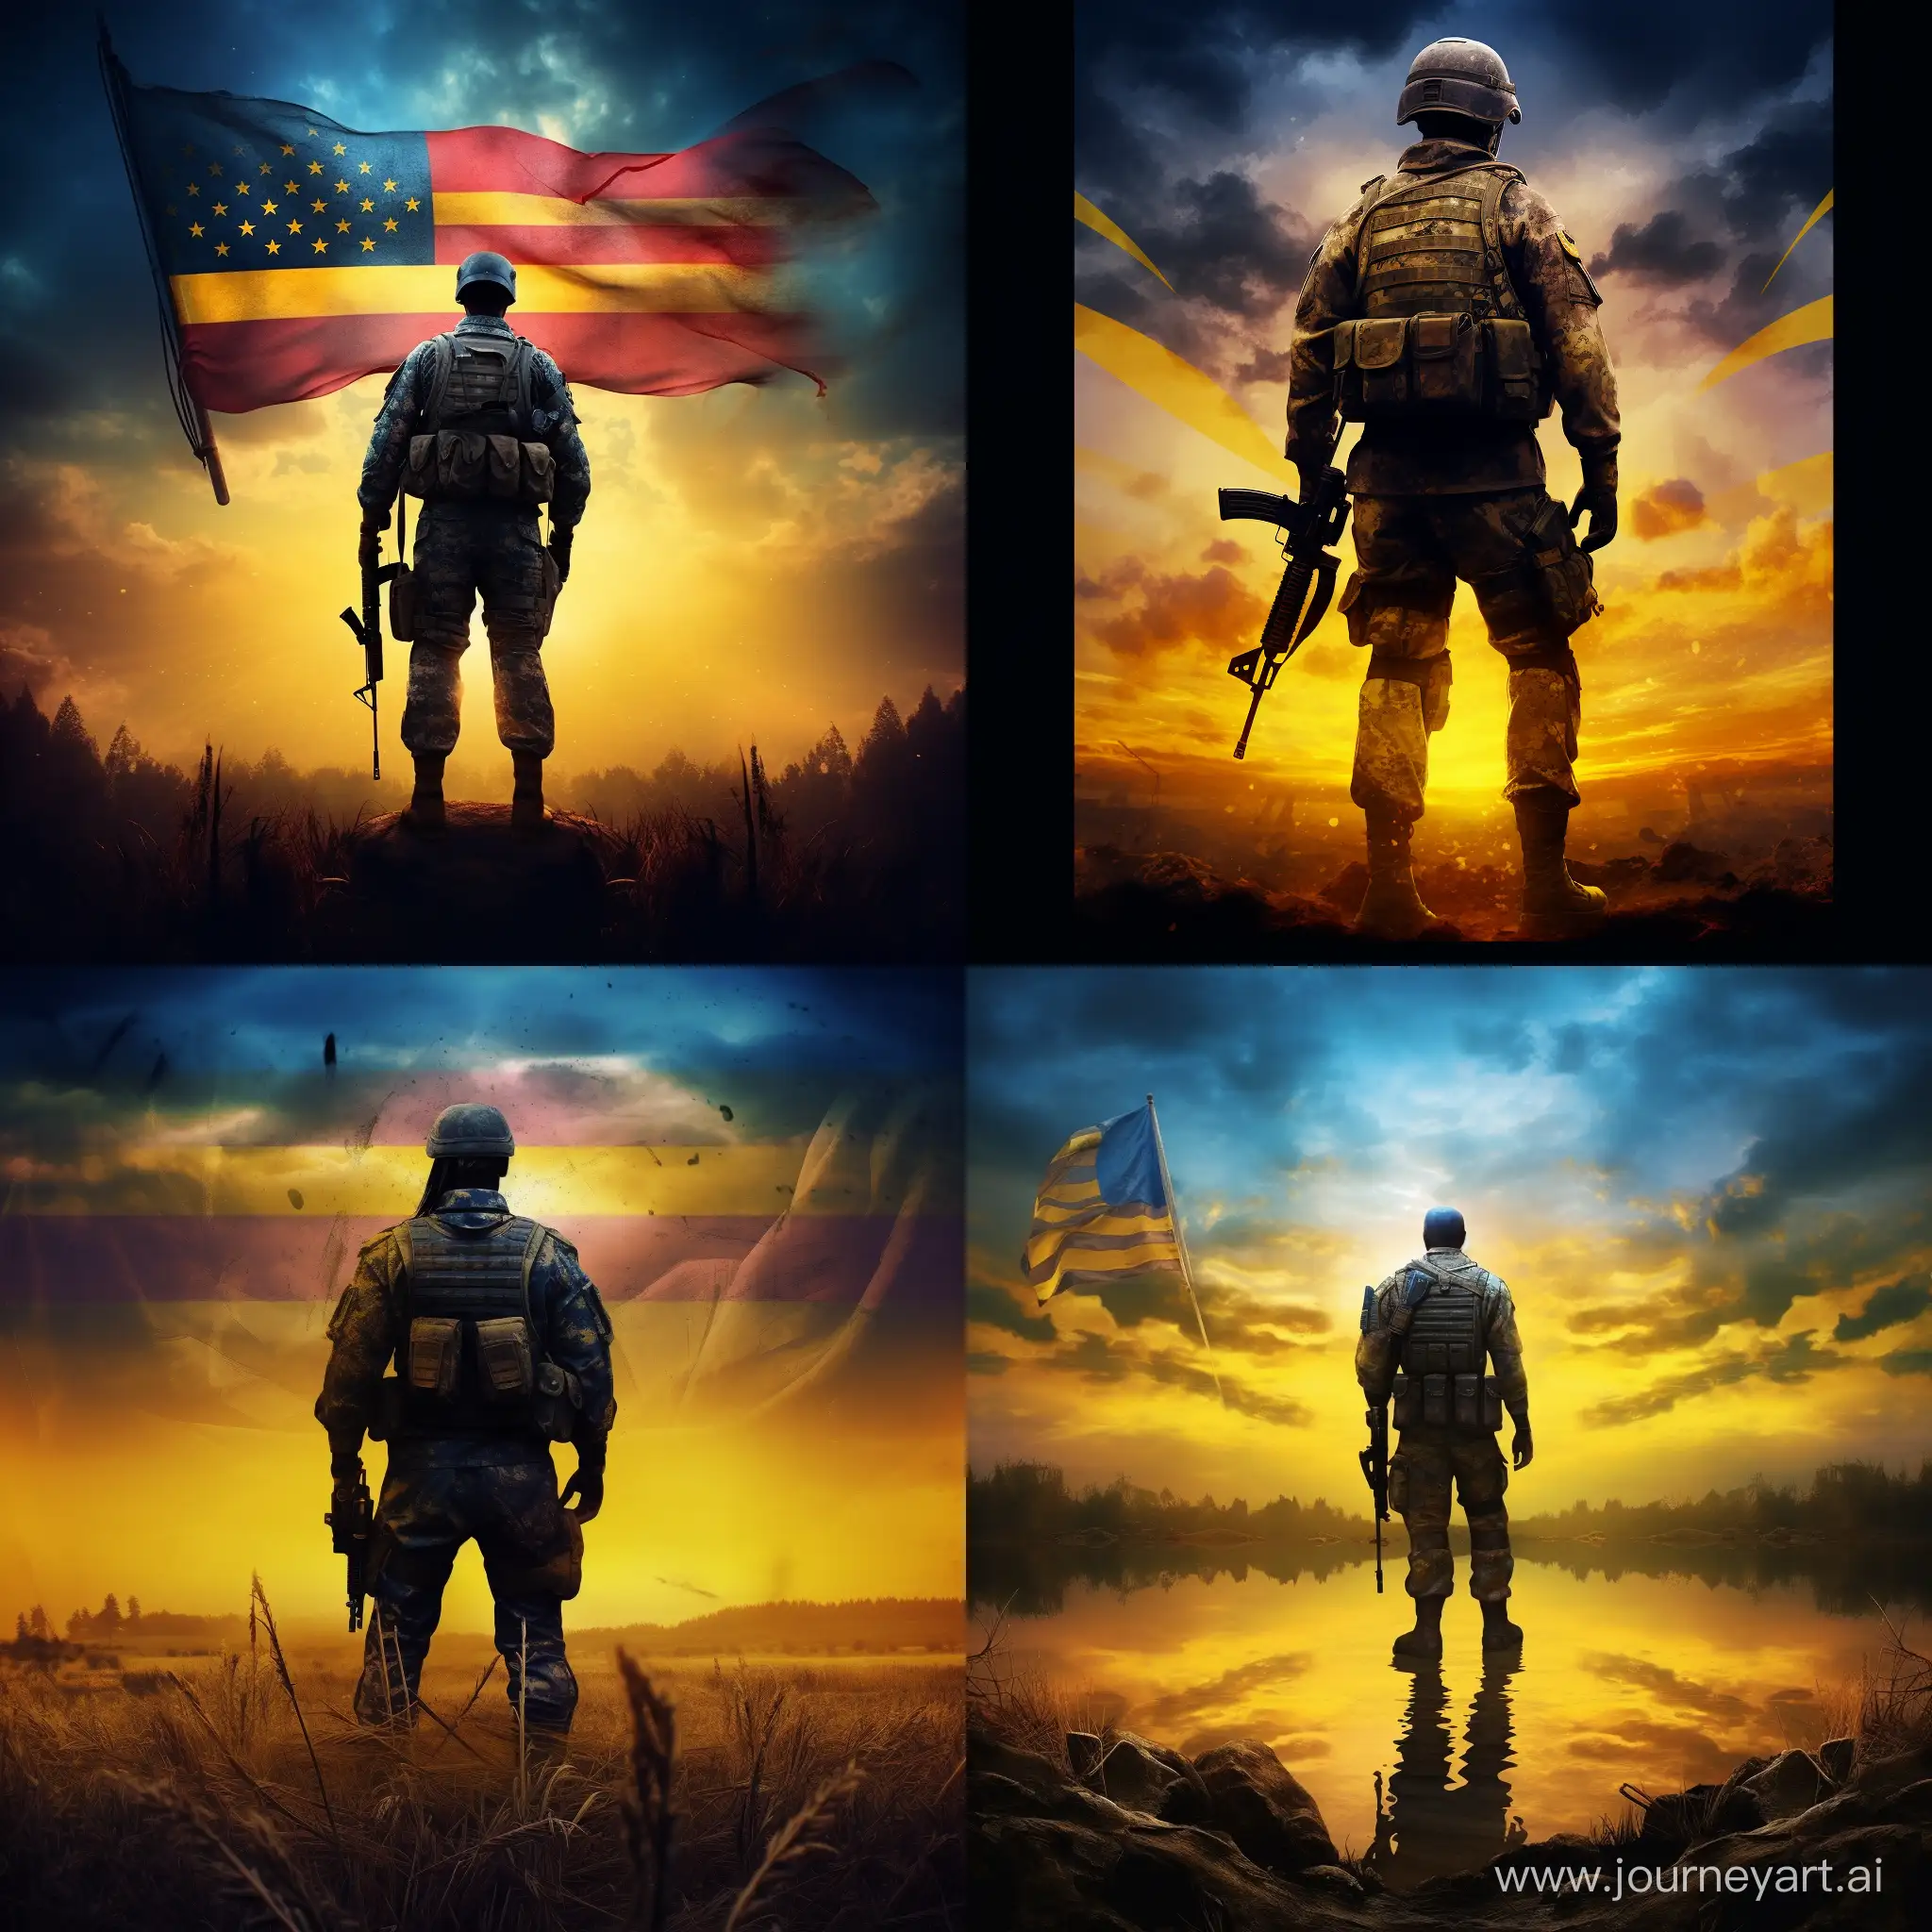 Ukrainian-Soldier-in-Epic-Sunset-with-Flag